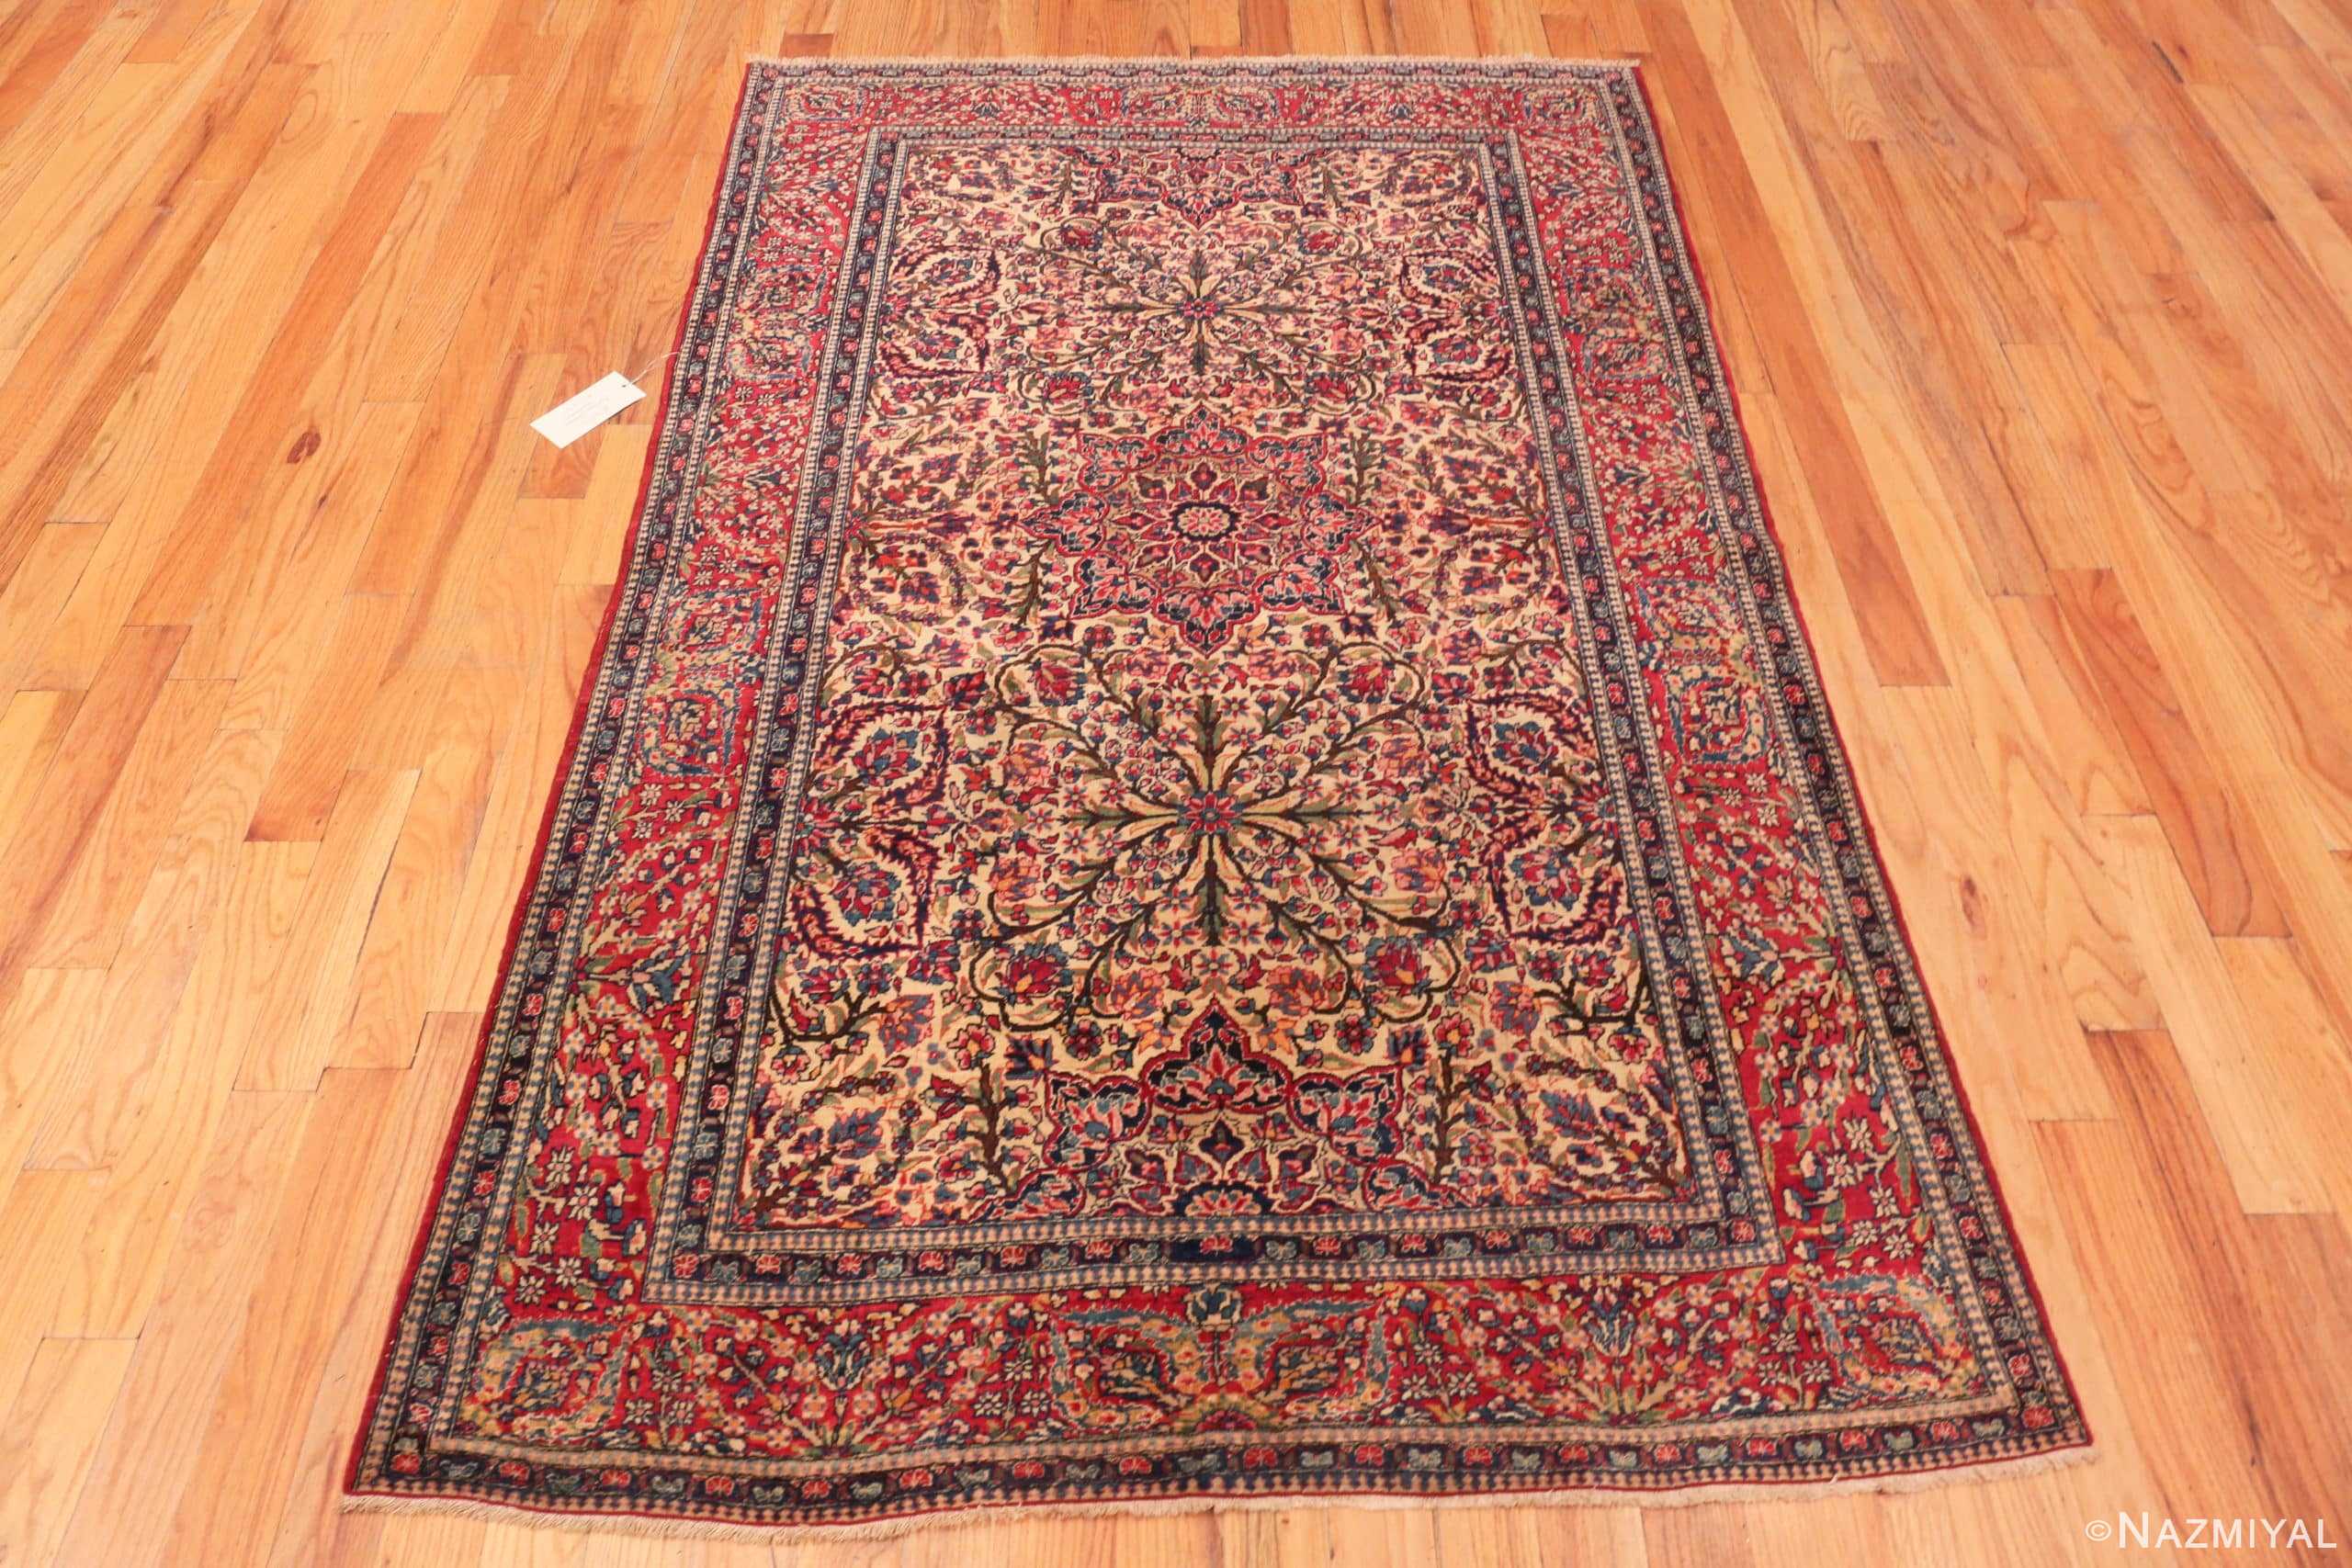 Whole View Of Marvelous Antique Persian Isfahan Rug 71117 by Nazmiyal Antique Rugs